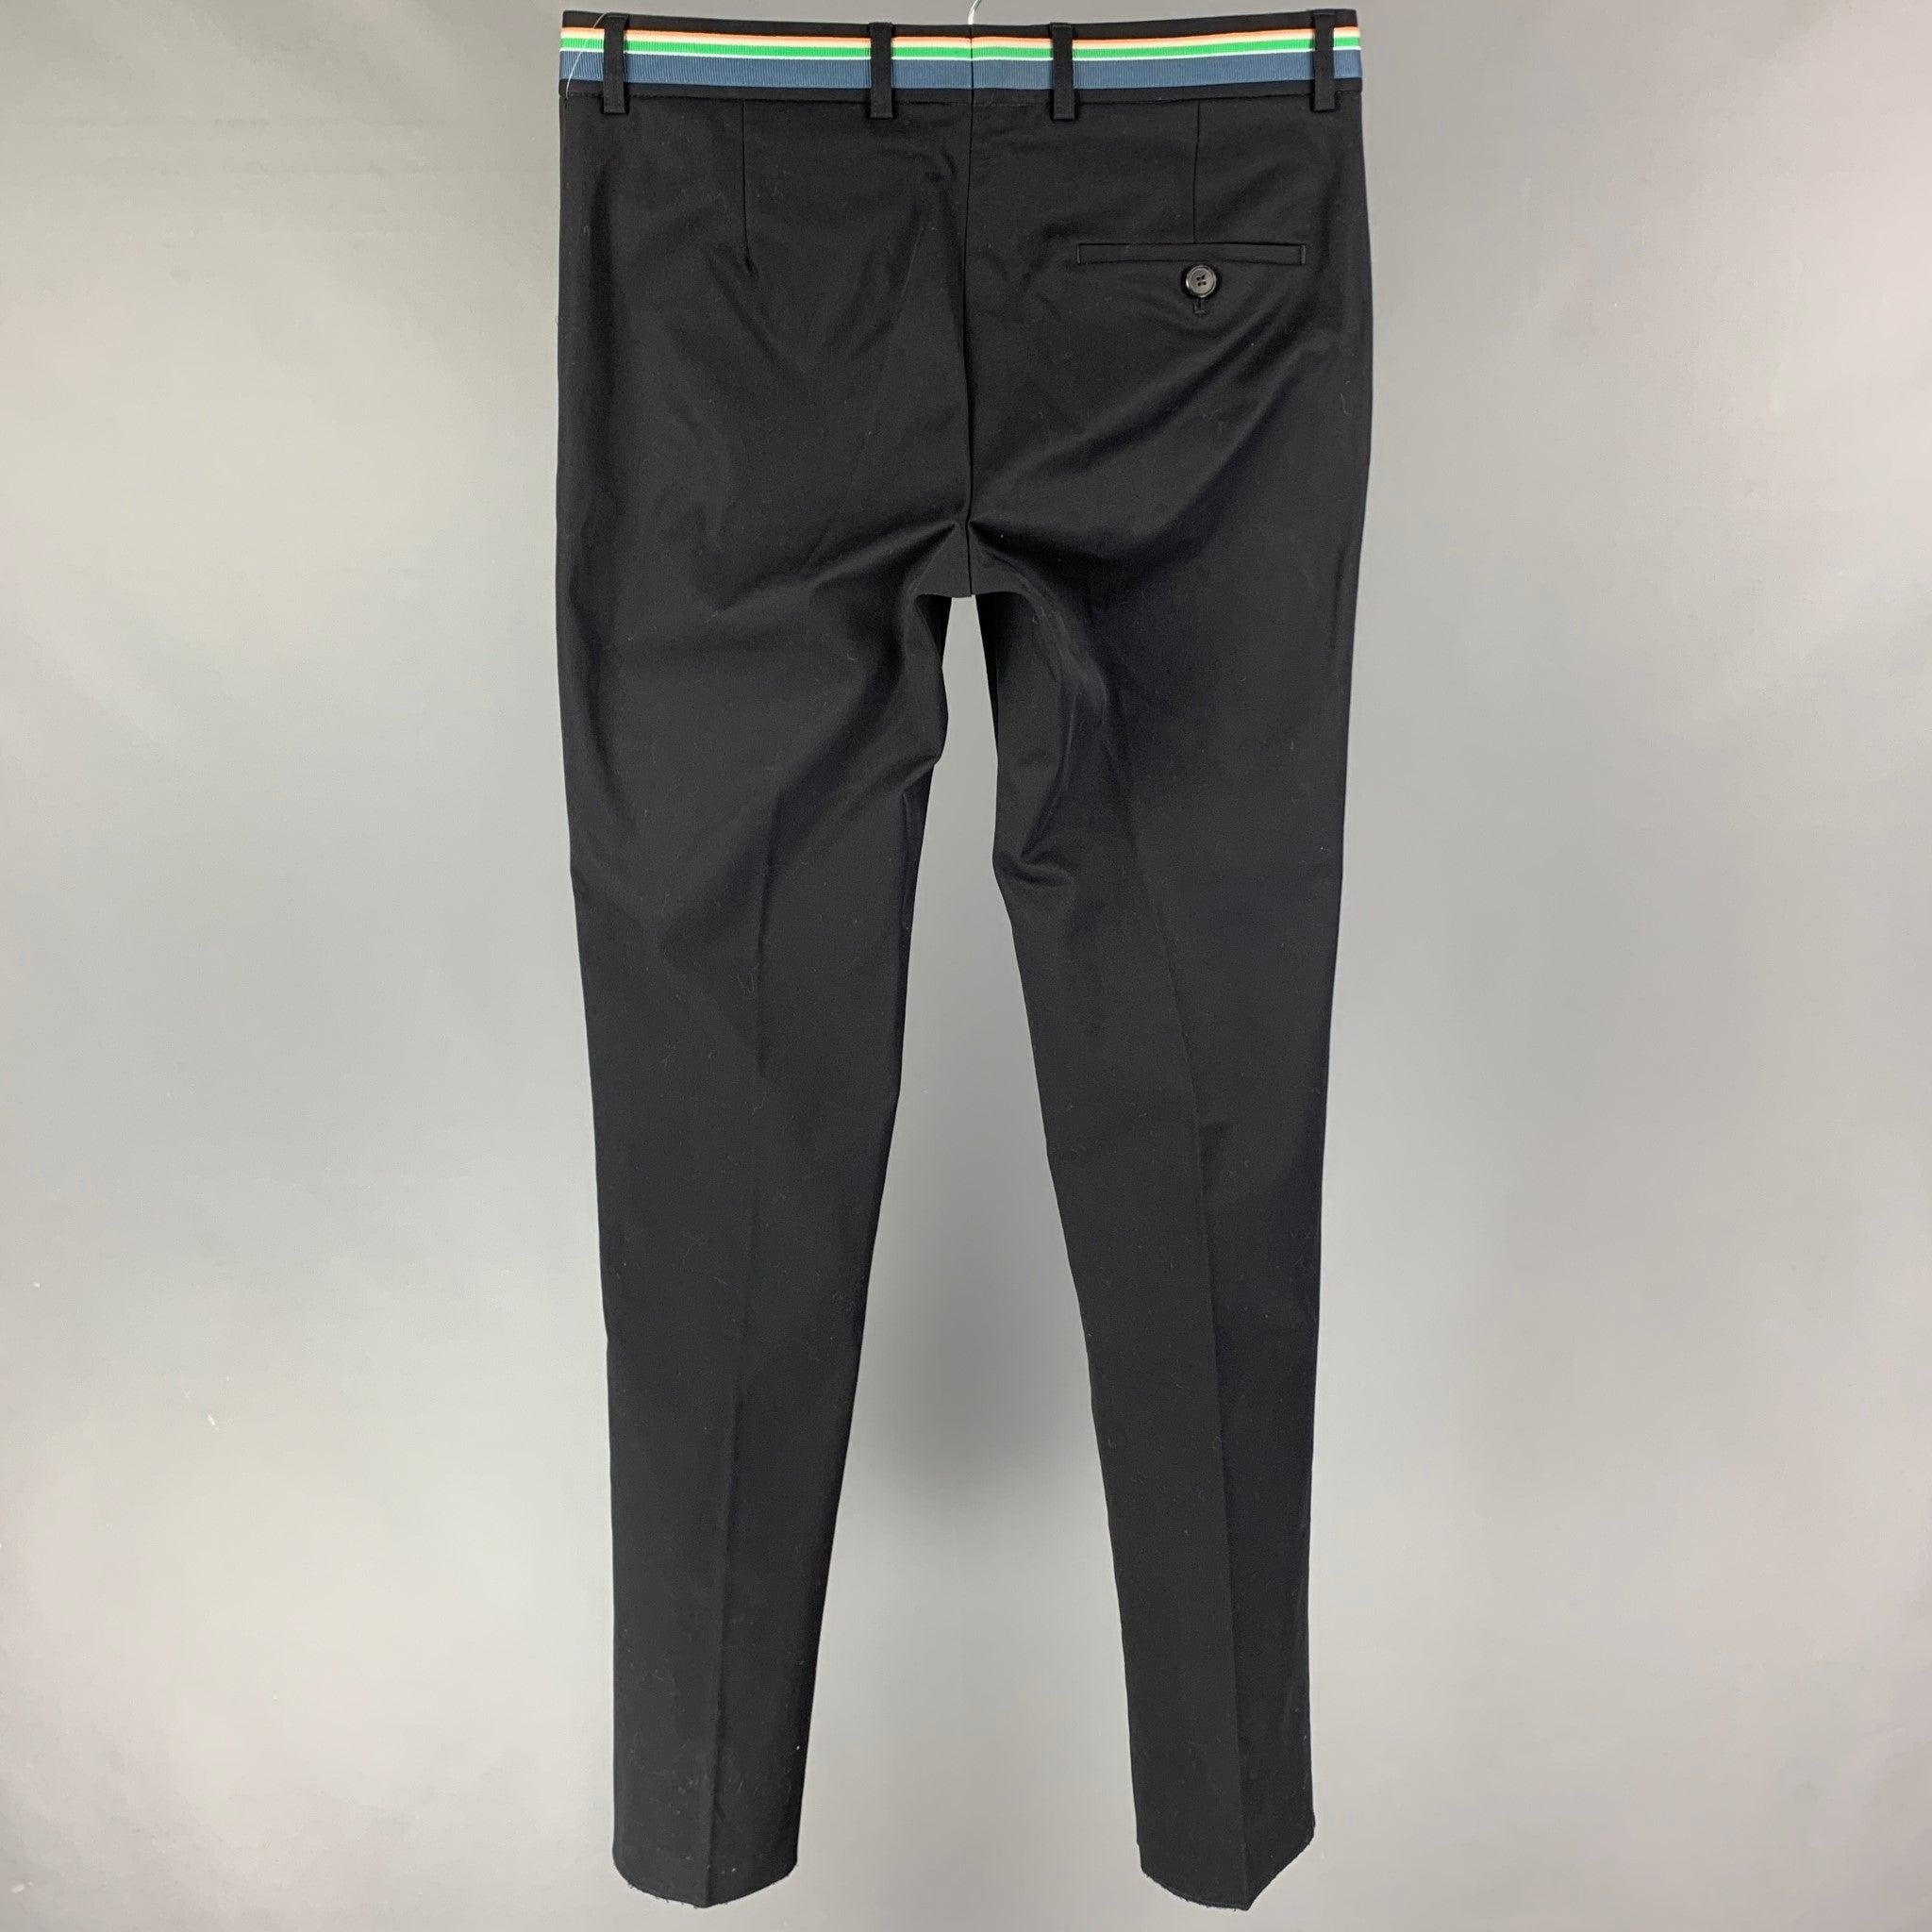 WALTER VAN BEIRENDONCK causal pants comes in a black wool / polyester featuring a flat front, striped trim, front tab, and a zip fly closure. Made in EU.
New With Tags. 

Marked:   46 

Measurements: 
  Waist: 32 inches  Rise: 9.5 inches  Inseam: 37